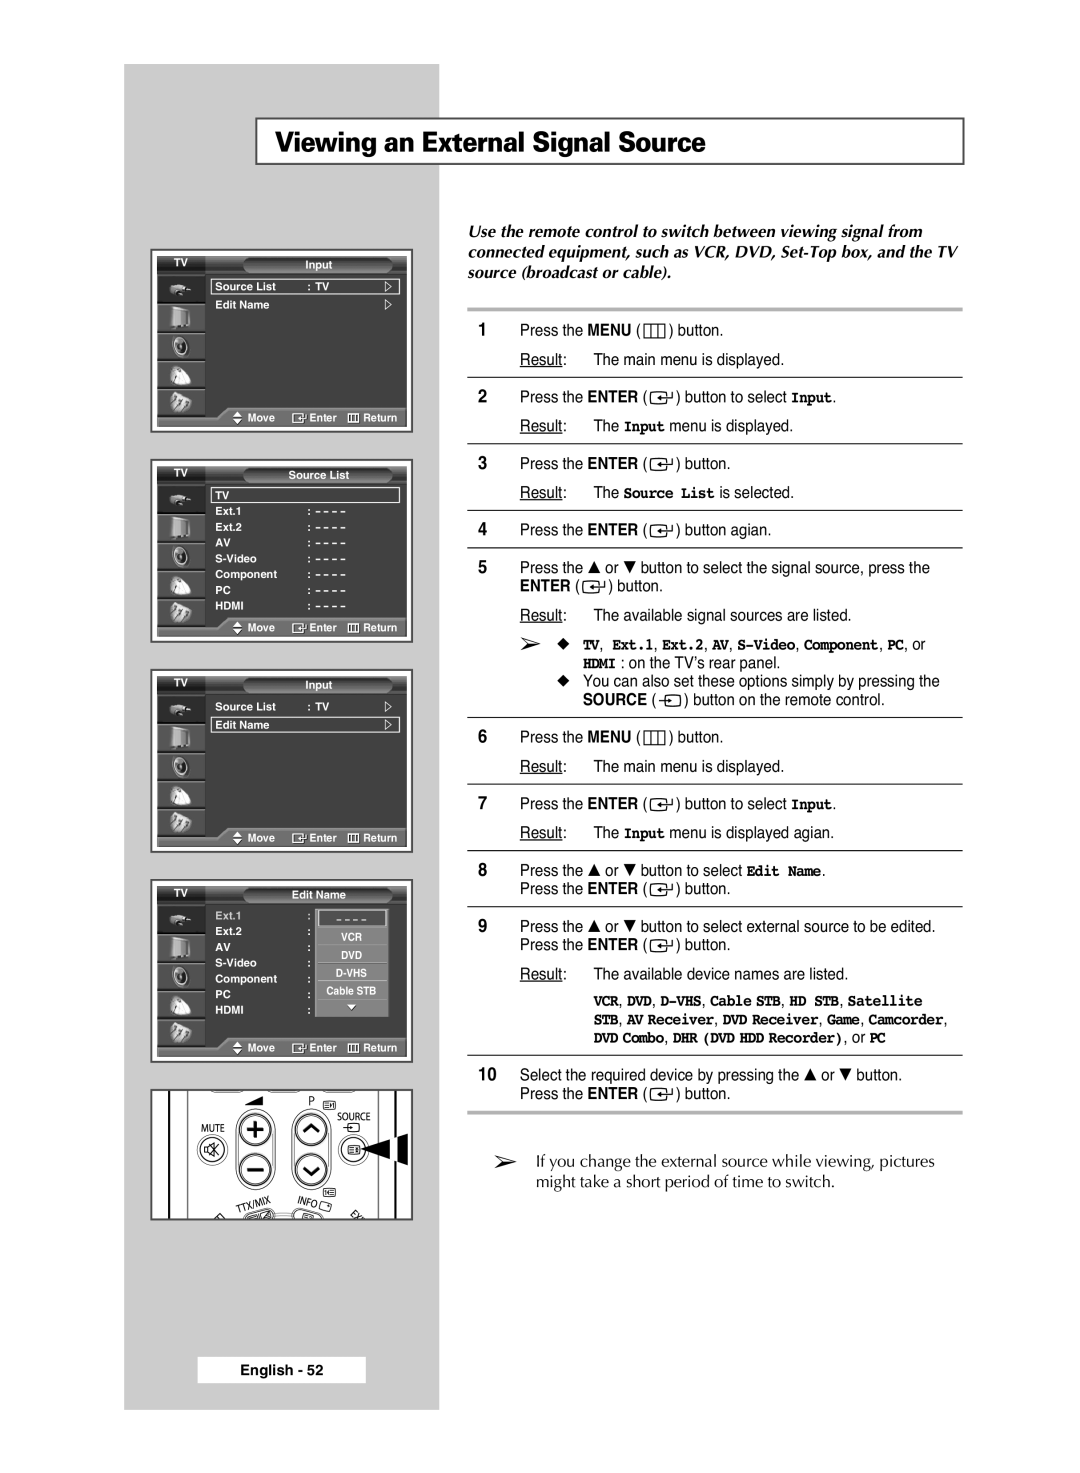 Samsung PS-42S5S manual Viewing an External Signal Source, TV, Ext.1, Ext.2, AV, S-Video, Component, PC, or 